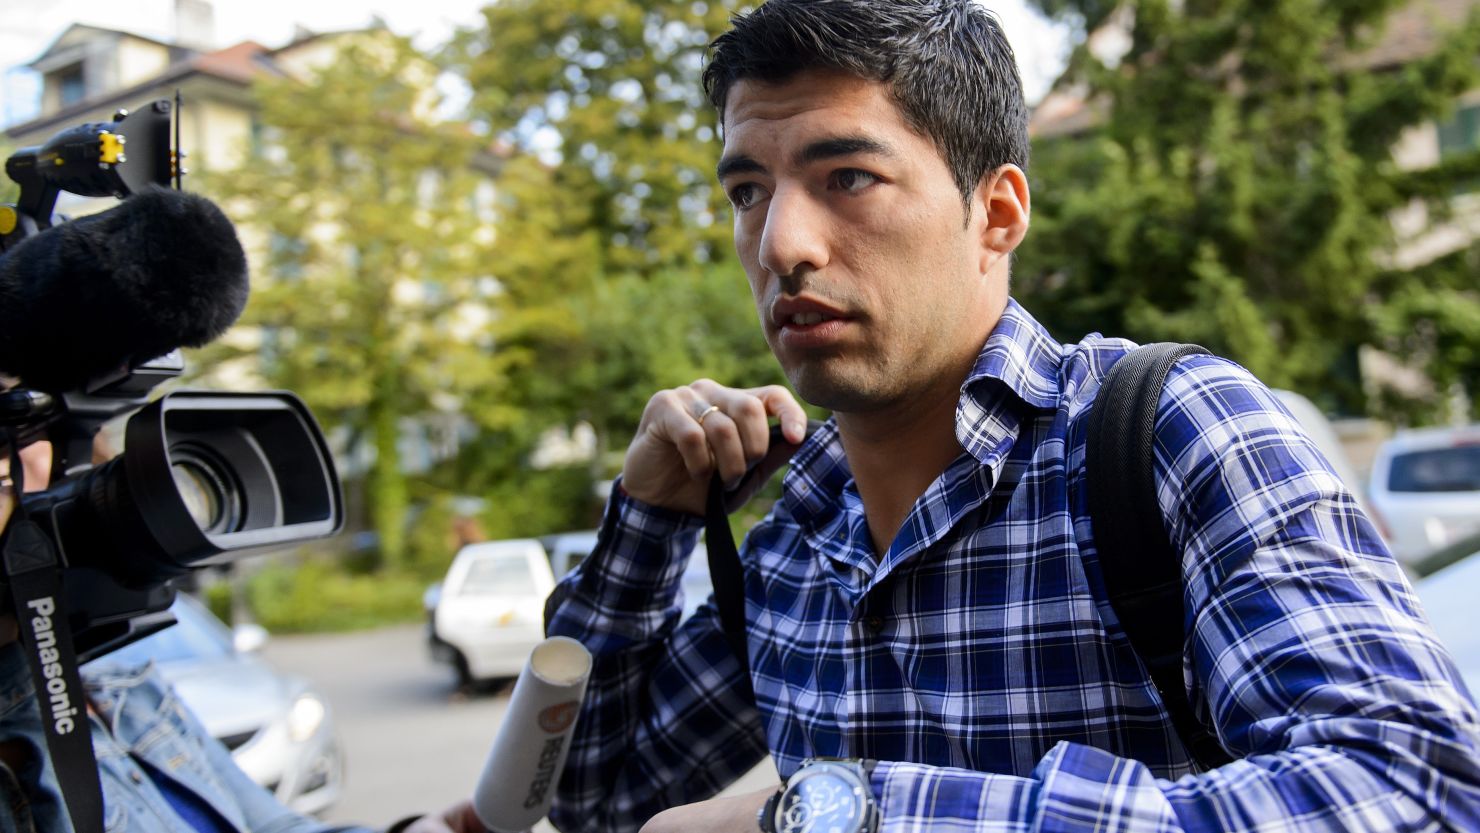 Luis Suarez arrives for his appeal at the CAS in Lausanne against his four-month biting ban imposed by FIFA.